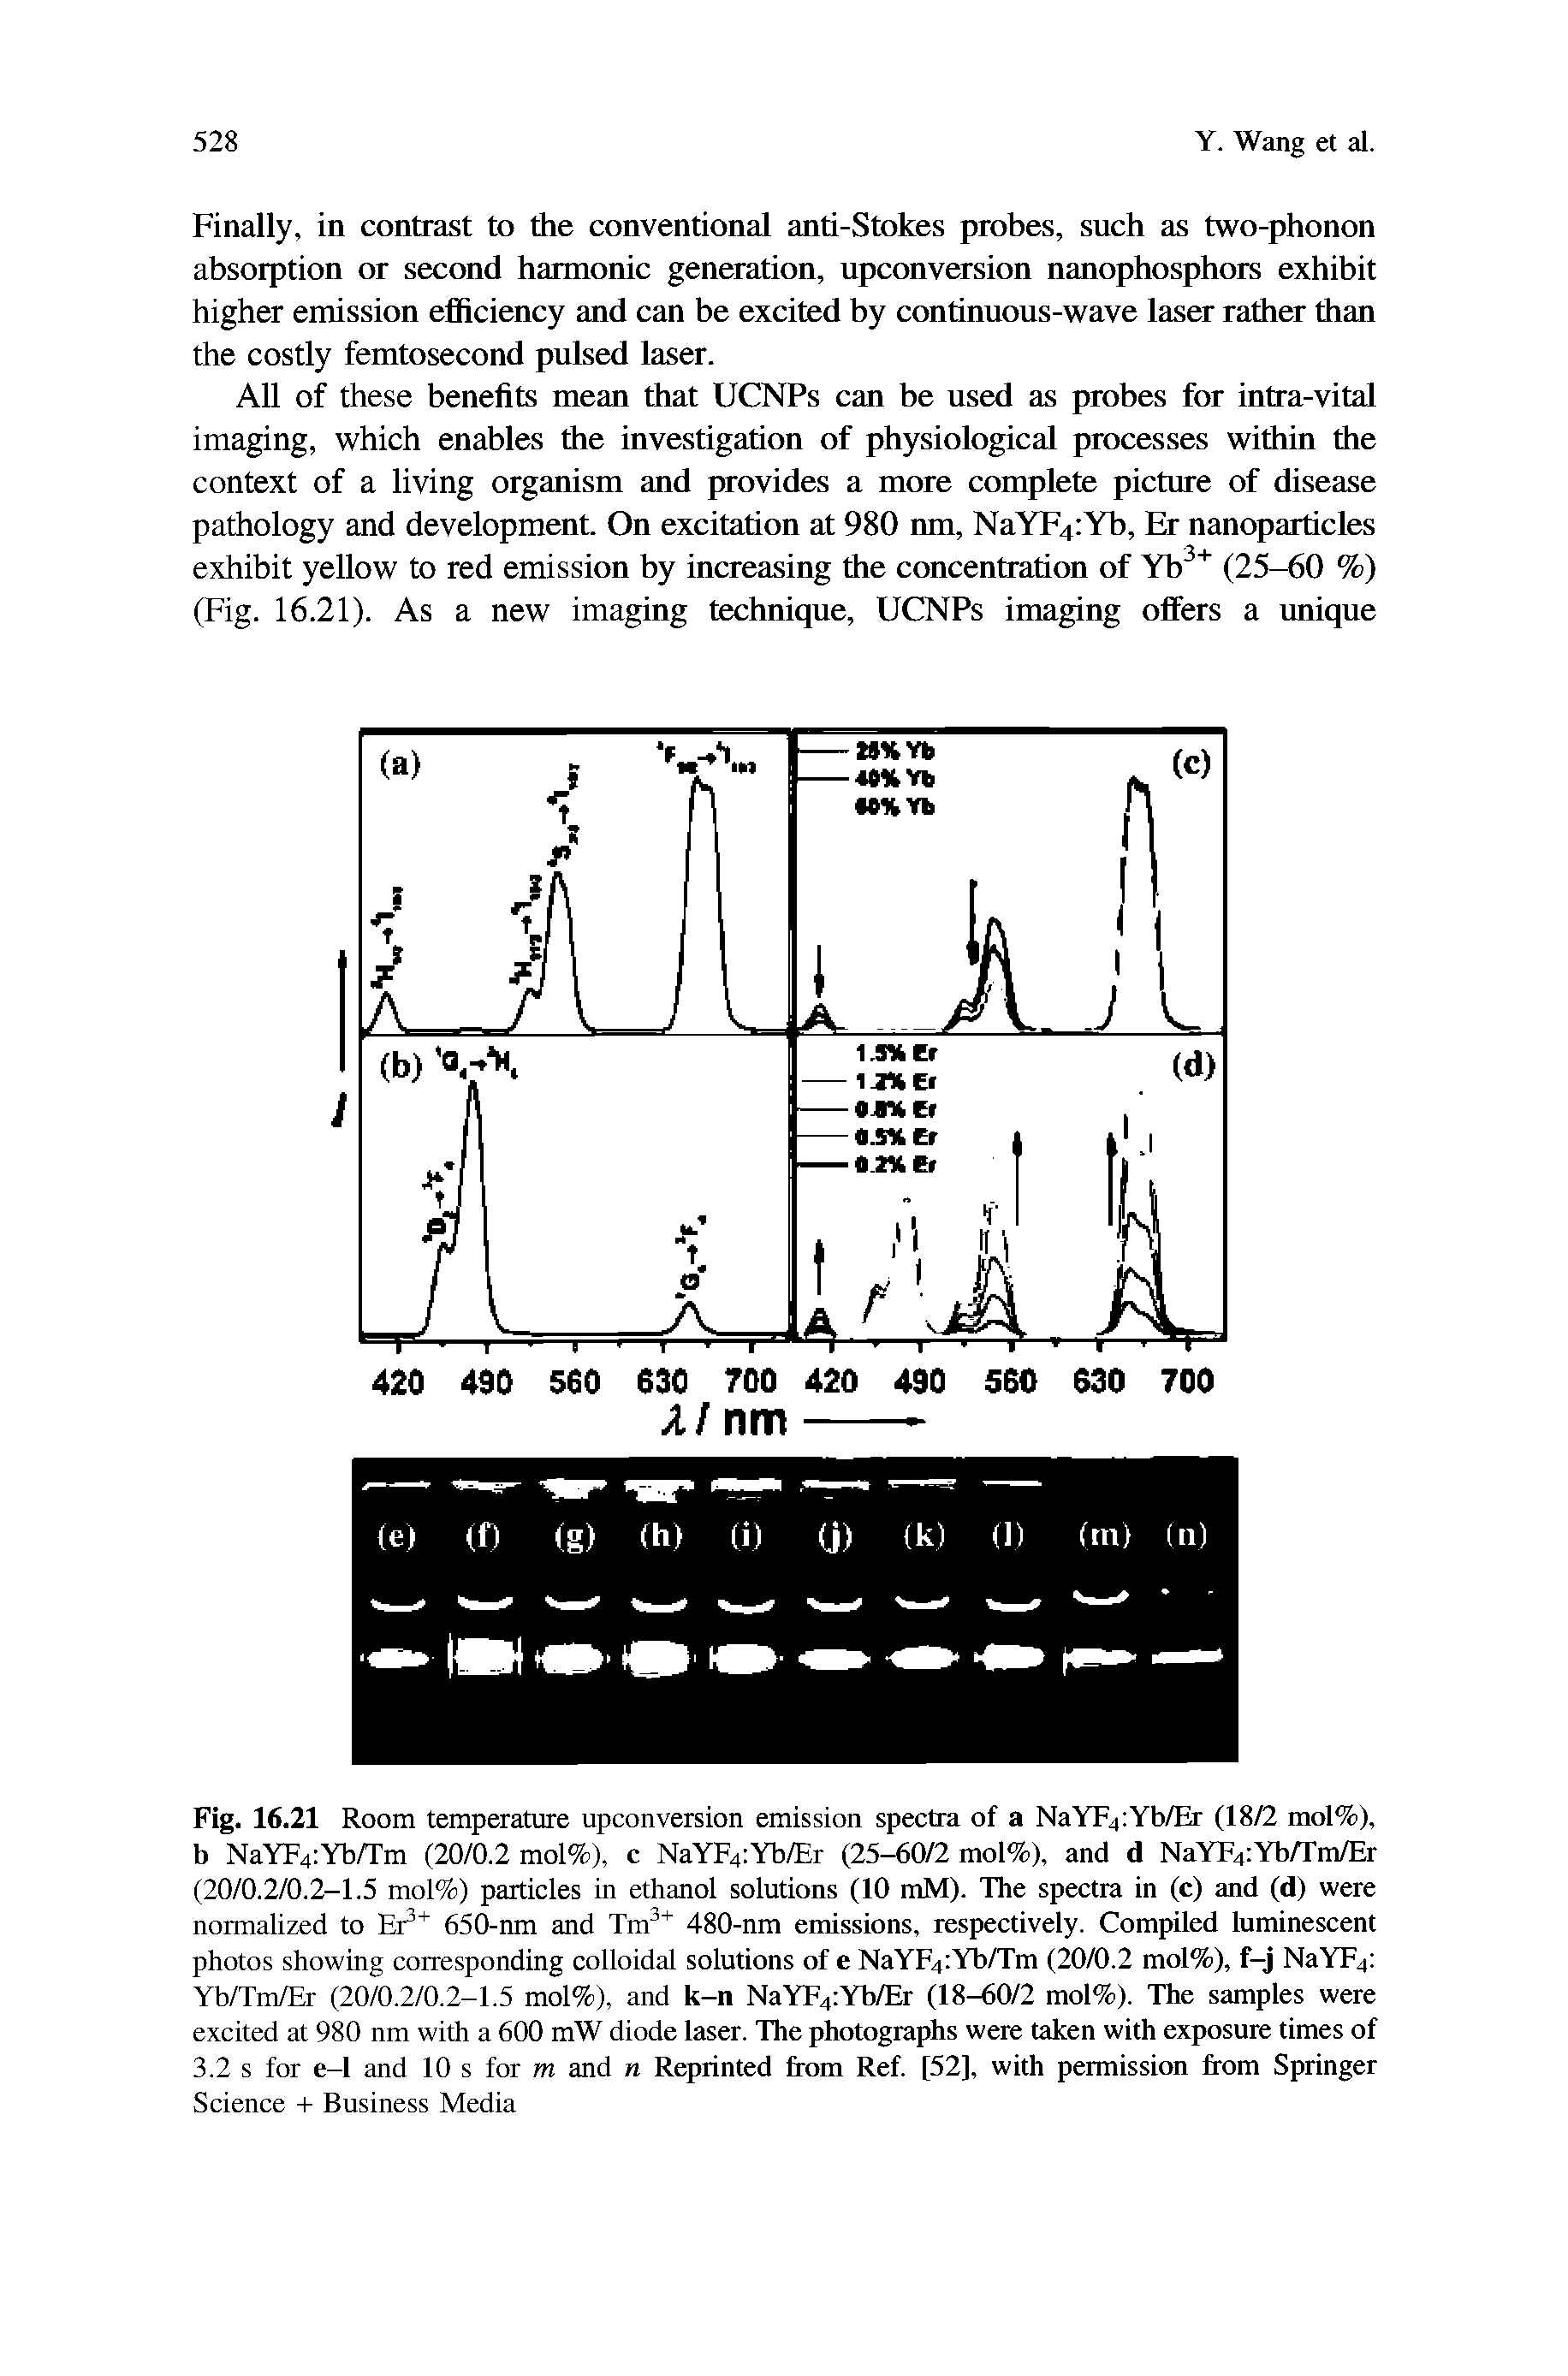 Fig. 16.21 Room temperature upconversion emission spectra of a NaYF4 Yb/Er (18/2 mol%), b NaYF4 Yb/Tm (20/0.2 mol%), c NaYF4 Yb/Er (25-60/2 mol%), and d NaYF4 Yb/Tm/Er (20/0.2/0.2-1.5 mol%) particles in ethanol solutions (10 mM). The spectra in (c) and (d) were normalized to Er 650-nm and Tm 480-nm emissions, respectively. Compiled luminescent photos showing corresponding colloidal solutions of e NaYF4 Yb/Tm (20/0.2 mol%), f-j NaYF4 Yb/Tm/Er (20/0.2/0.2-1.5 mol%), and k-n NaYF4 Yb/Er (18-60/2 mol%). The samples were excited at 980 nm with a 600 mW diode laser. The photographs were taken with exposure times of 3.2 s for e-l and 10 s for m and n Reprinted from Ref. [52], with permission from Springer Science + Business Media...